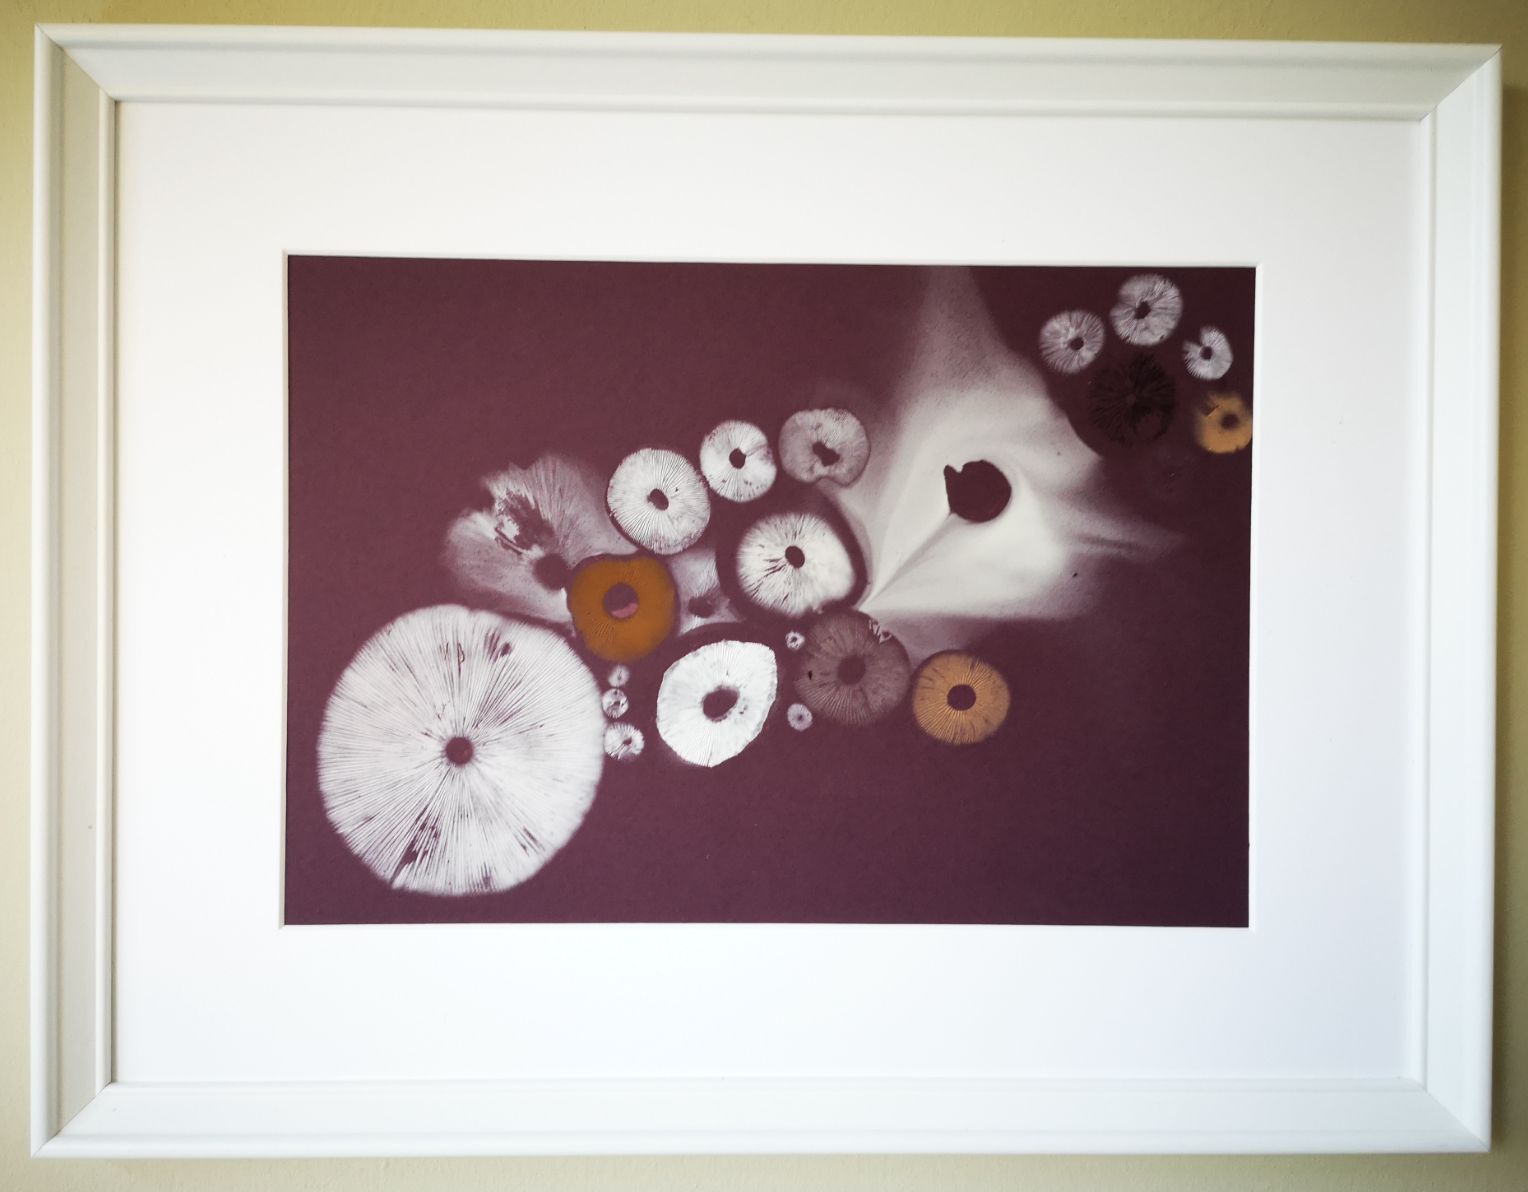 Russula and friends on Plum - Sold